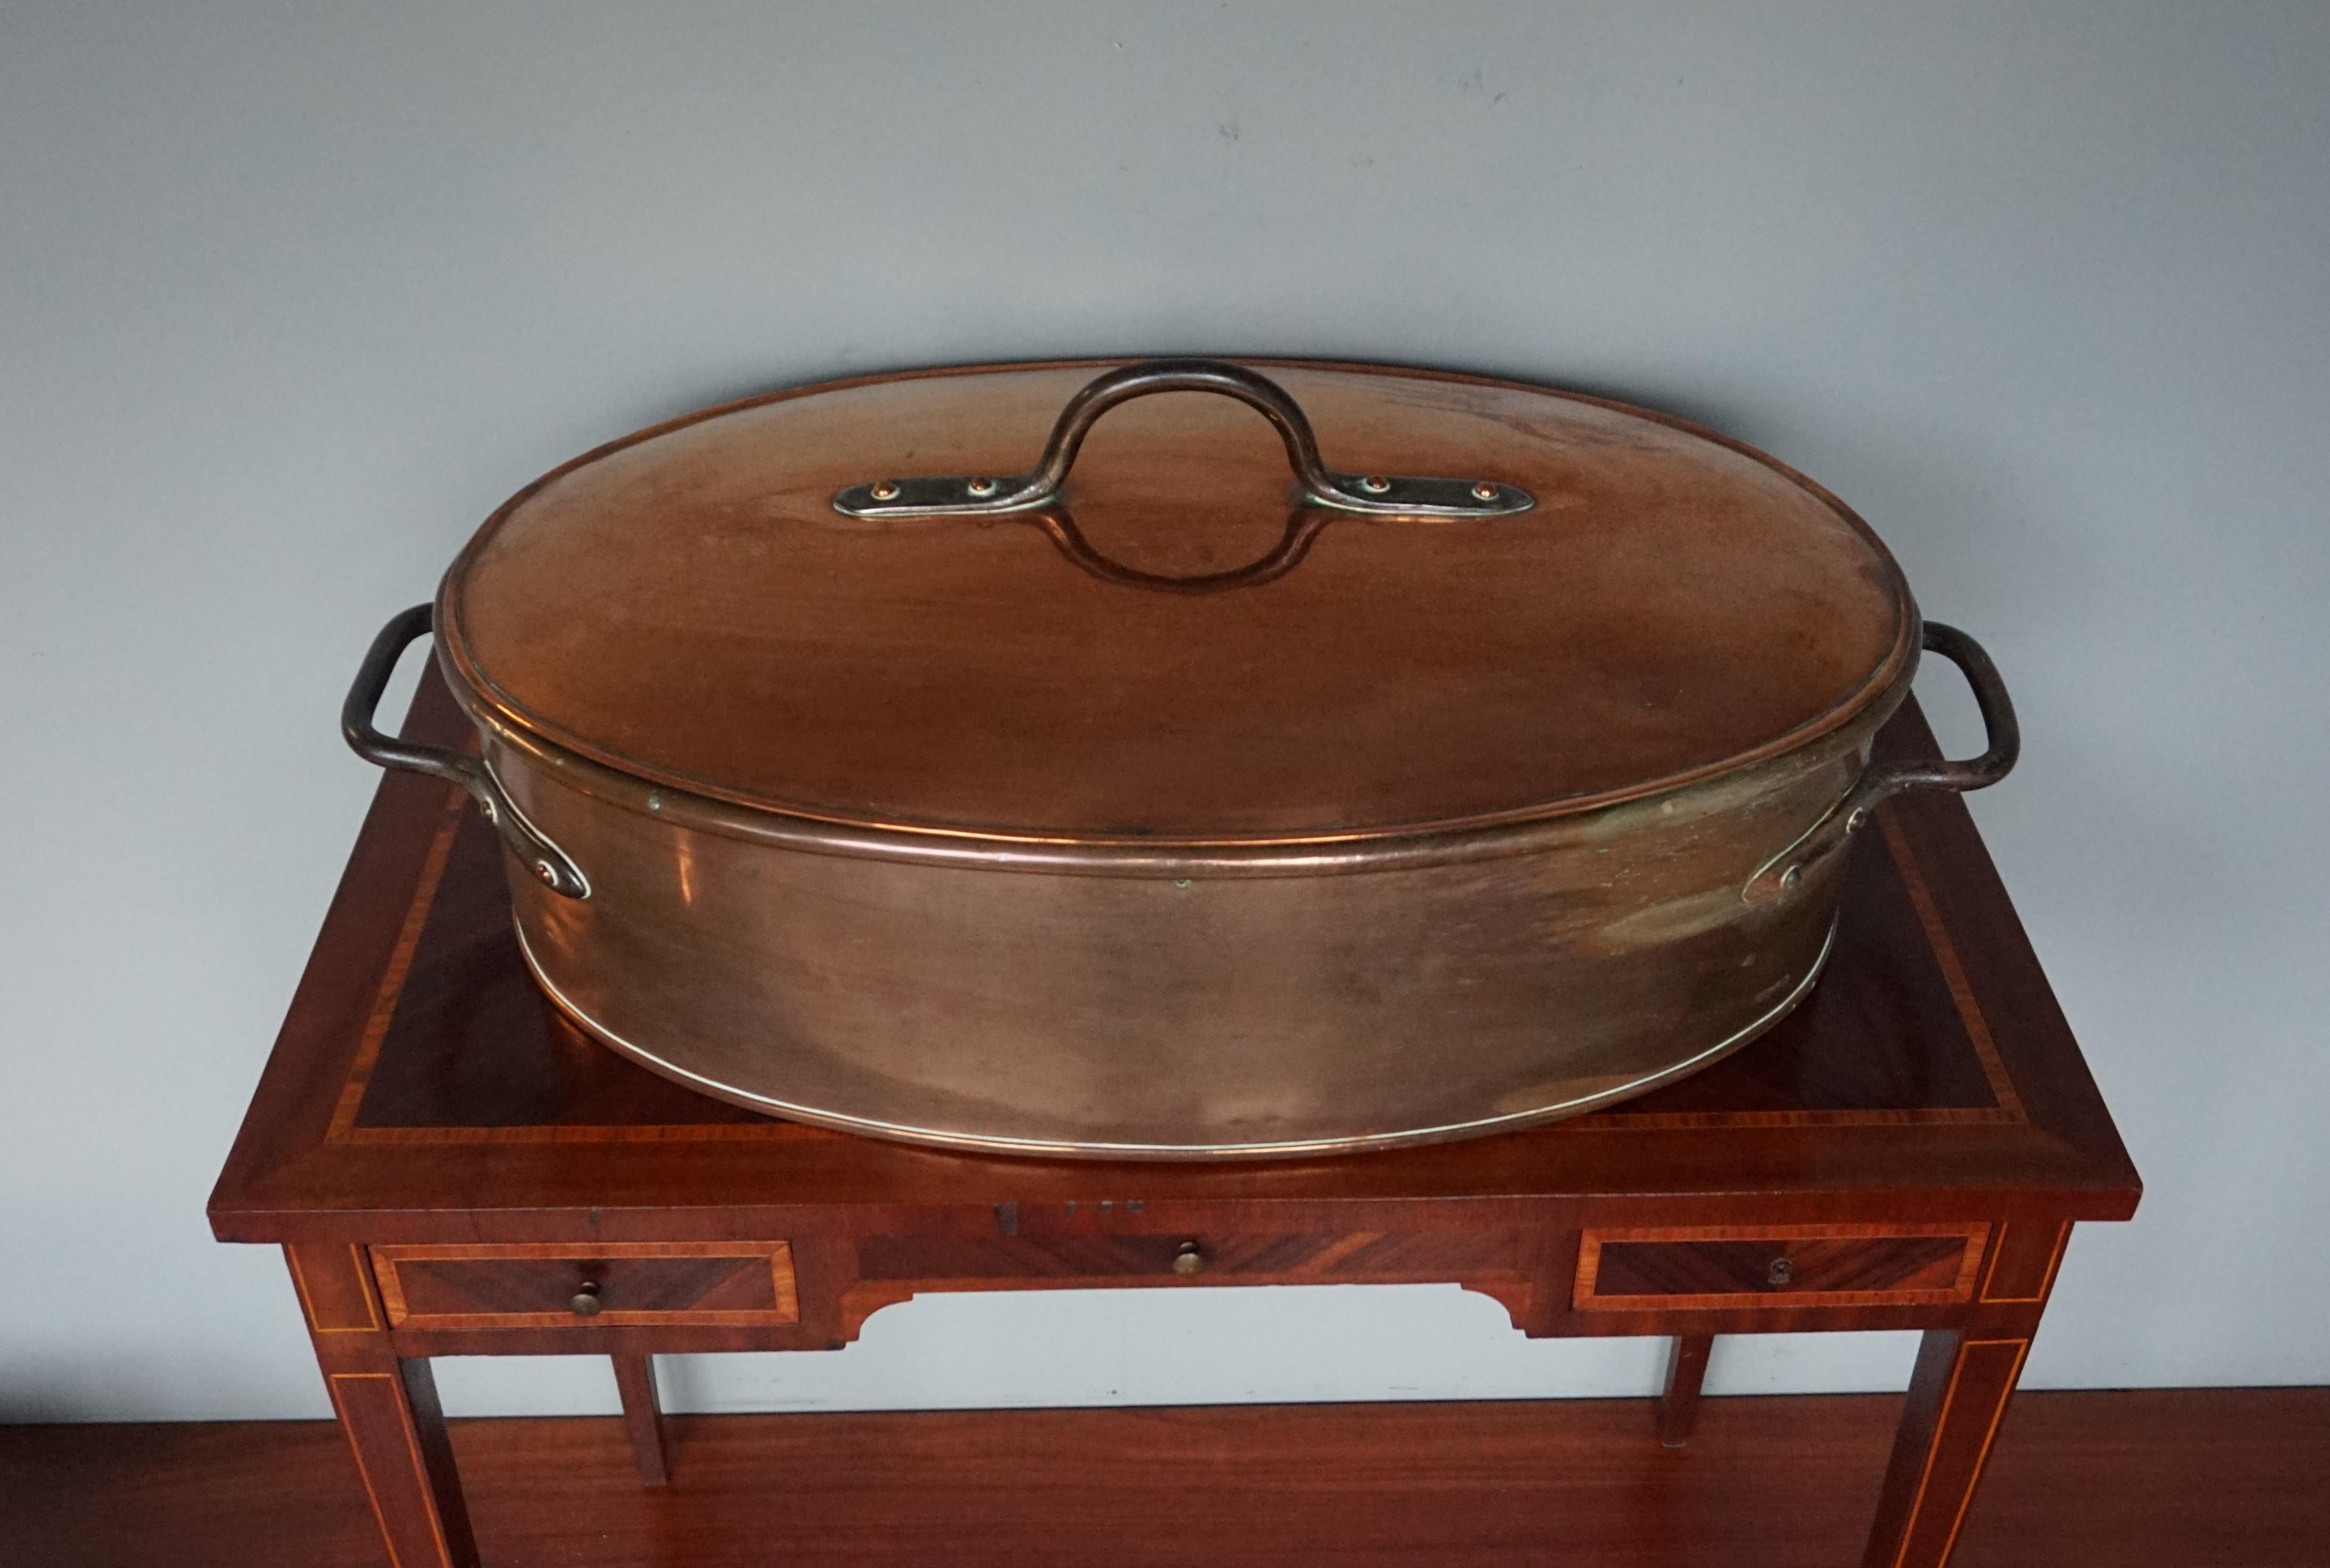 Stunning & Largest Ever Pair of Antique Copper Pans for Wild Roast in Late 1700s For Sale 5